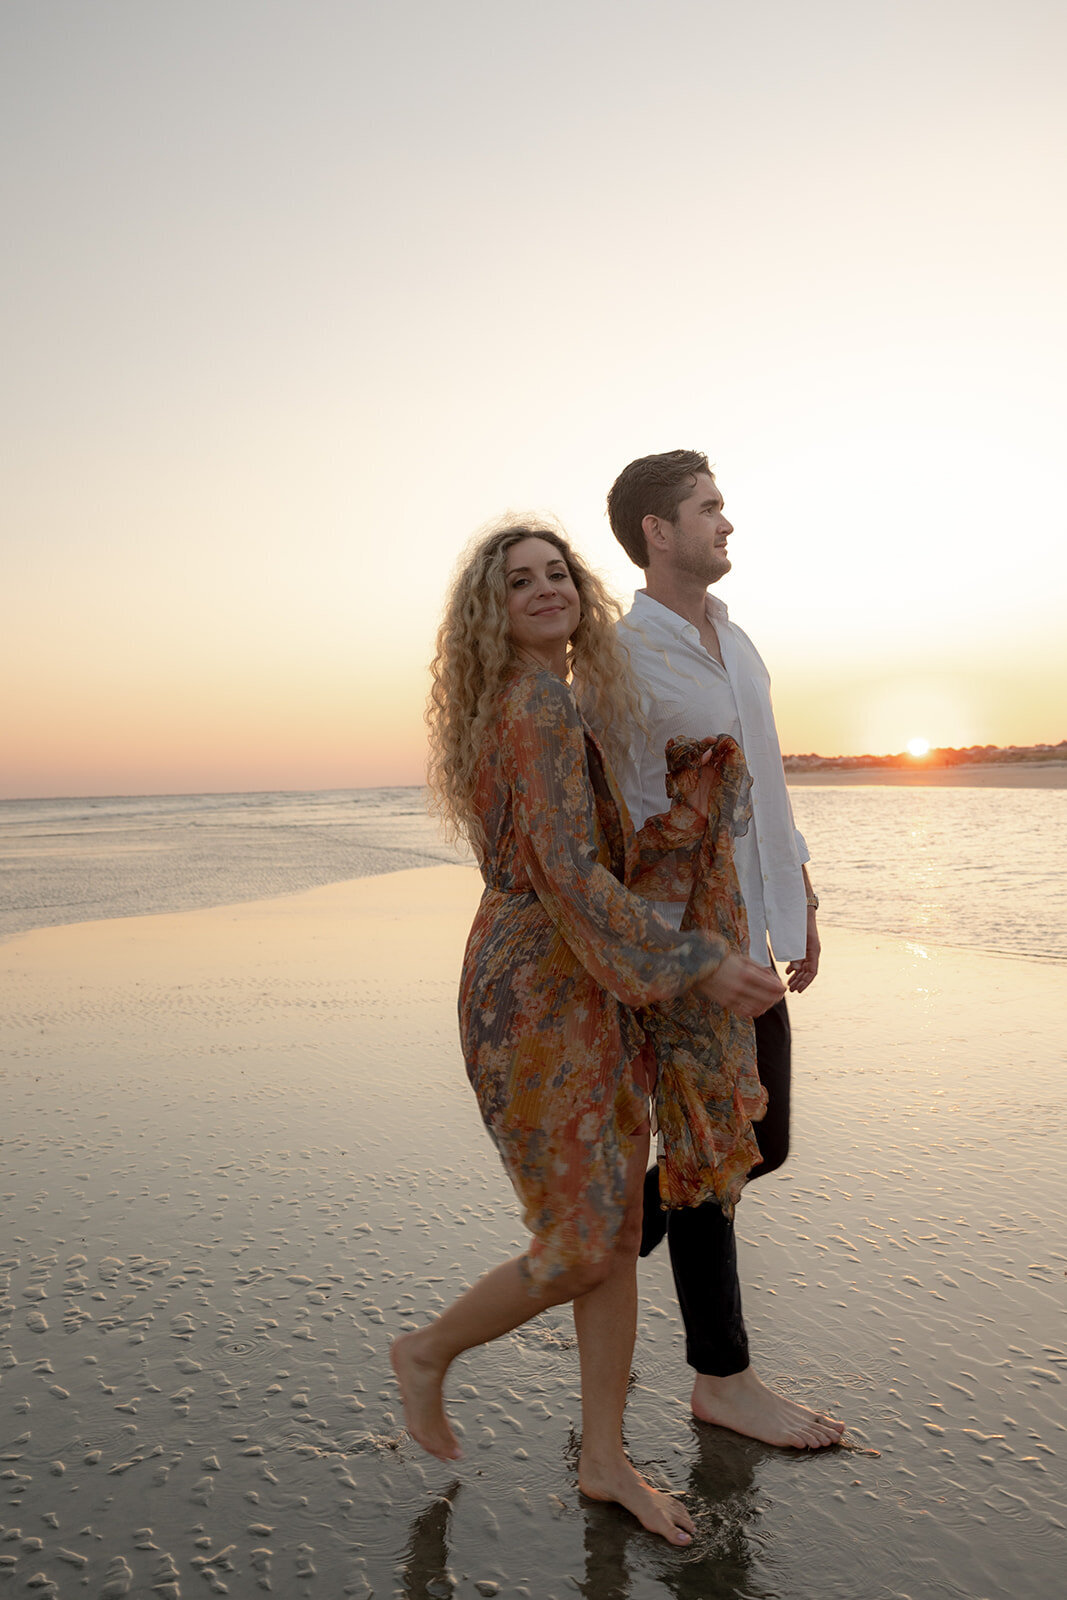 Couple walking side-by-side at the bech. Woman in orange dress with flower pattern is walking in foreground and holding on to man's arm. Sun is setting in the background and reflecting romatically on water.